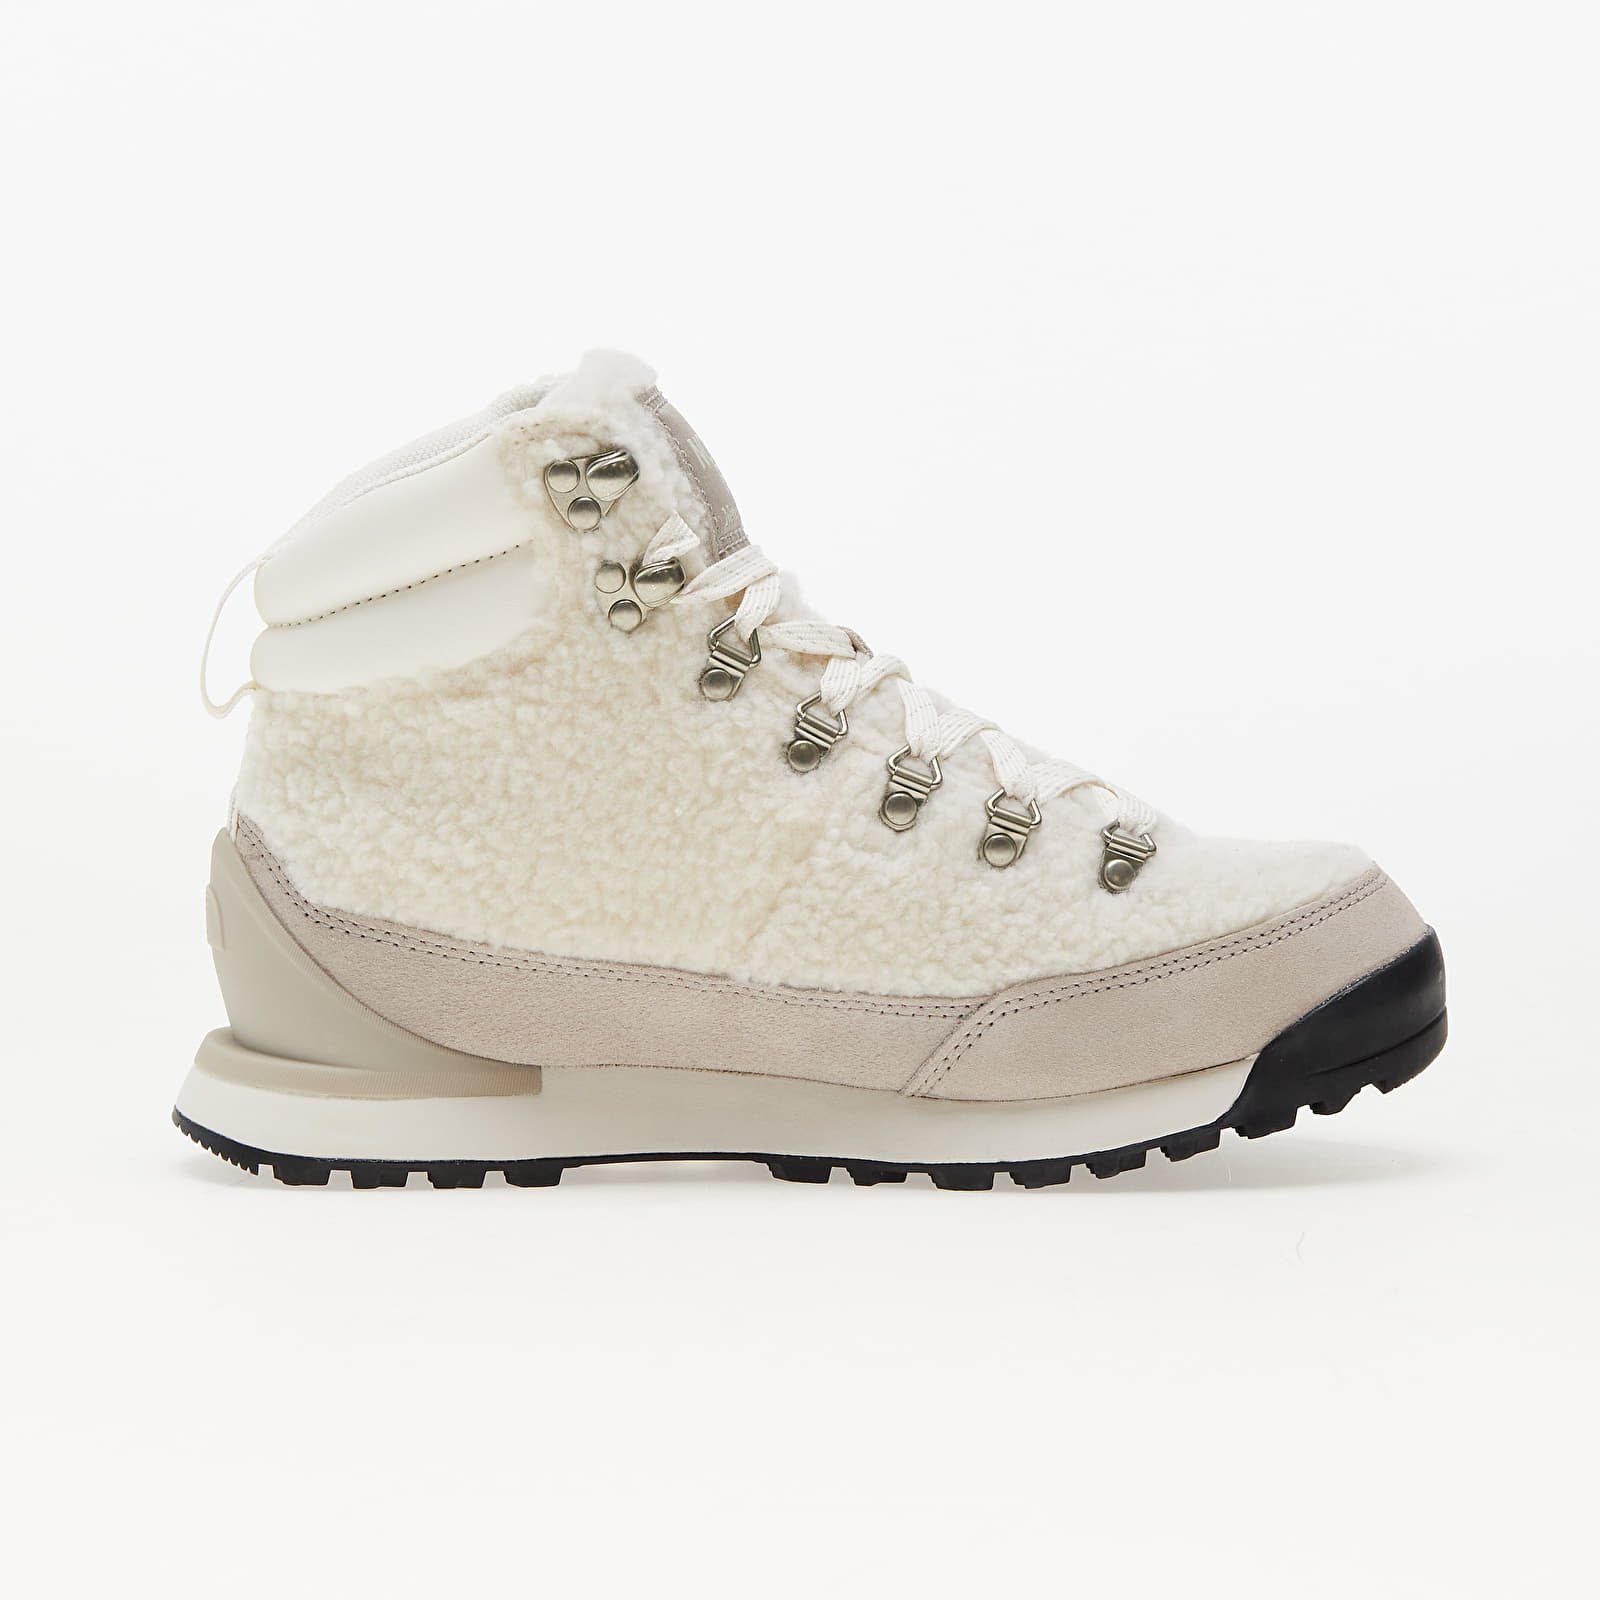 Back-To-Berkeley Iv High Pile White, Women's high-top trainers